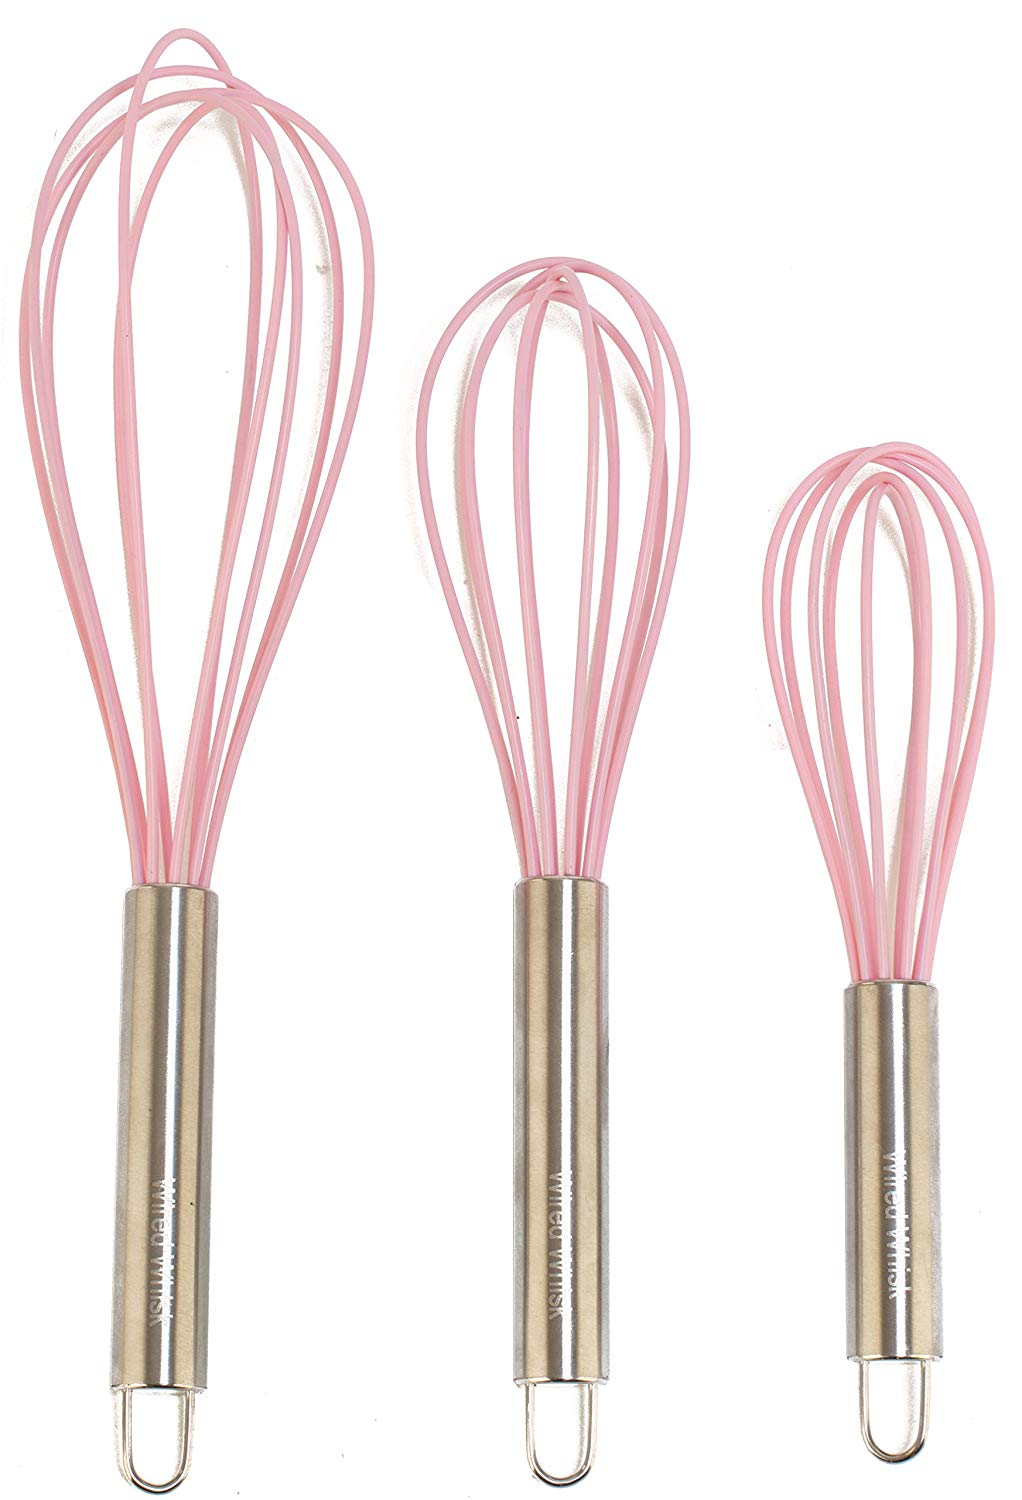 OXO Good Grips 11in Red Silicone Balloon Whisk - Kitchen & Company